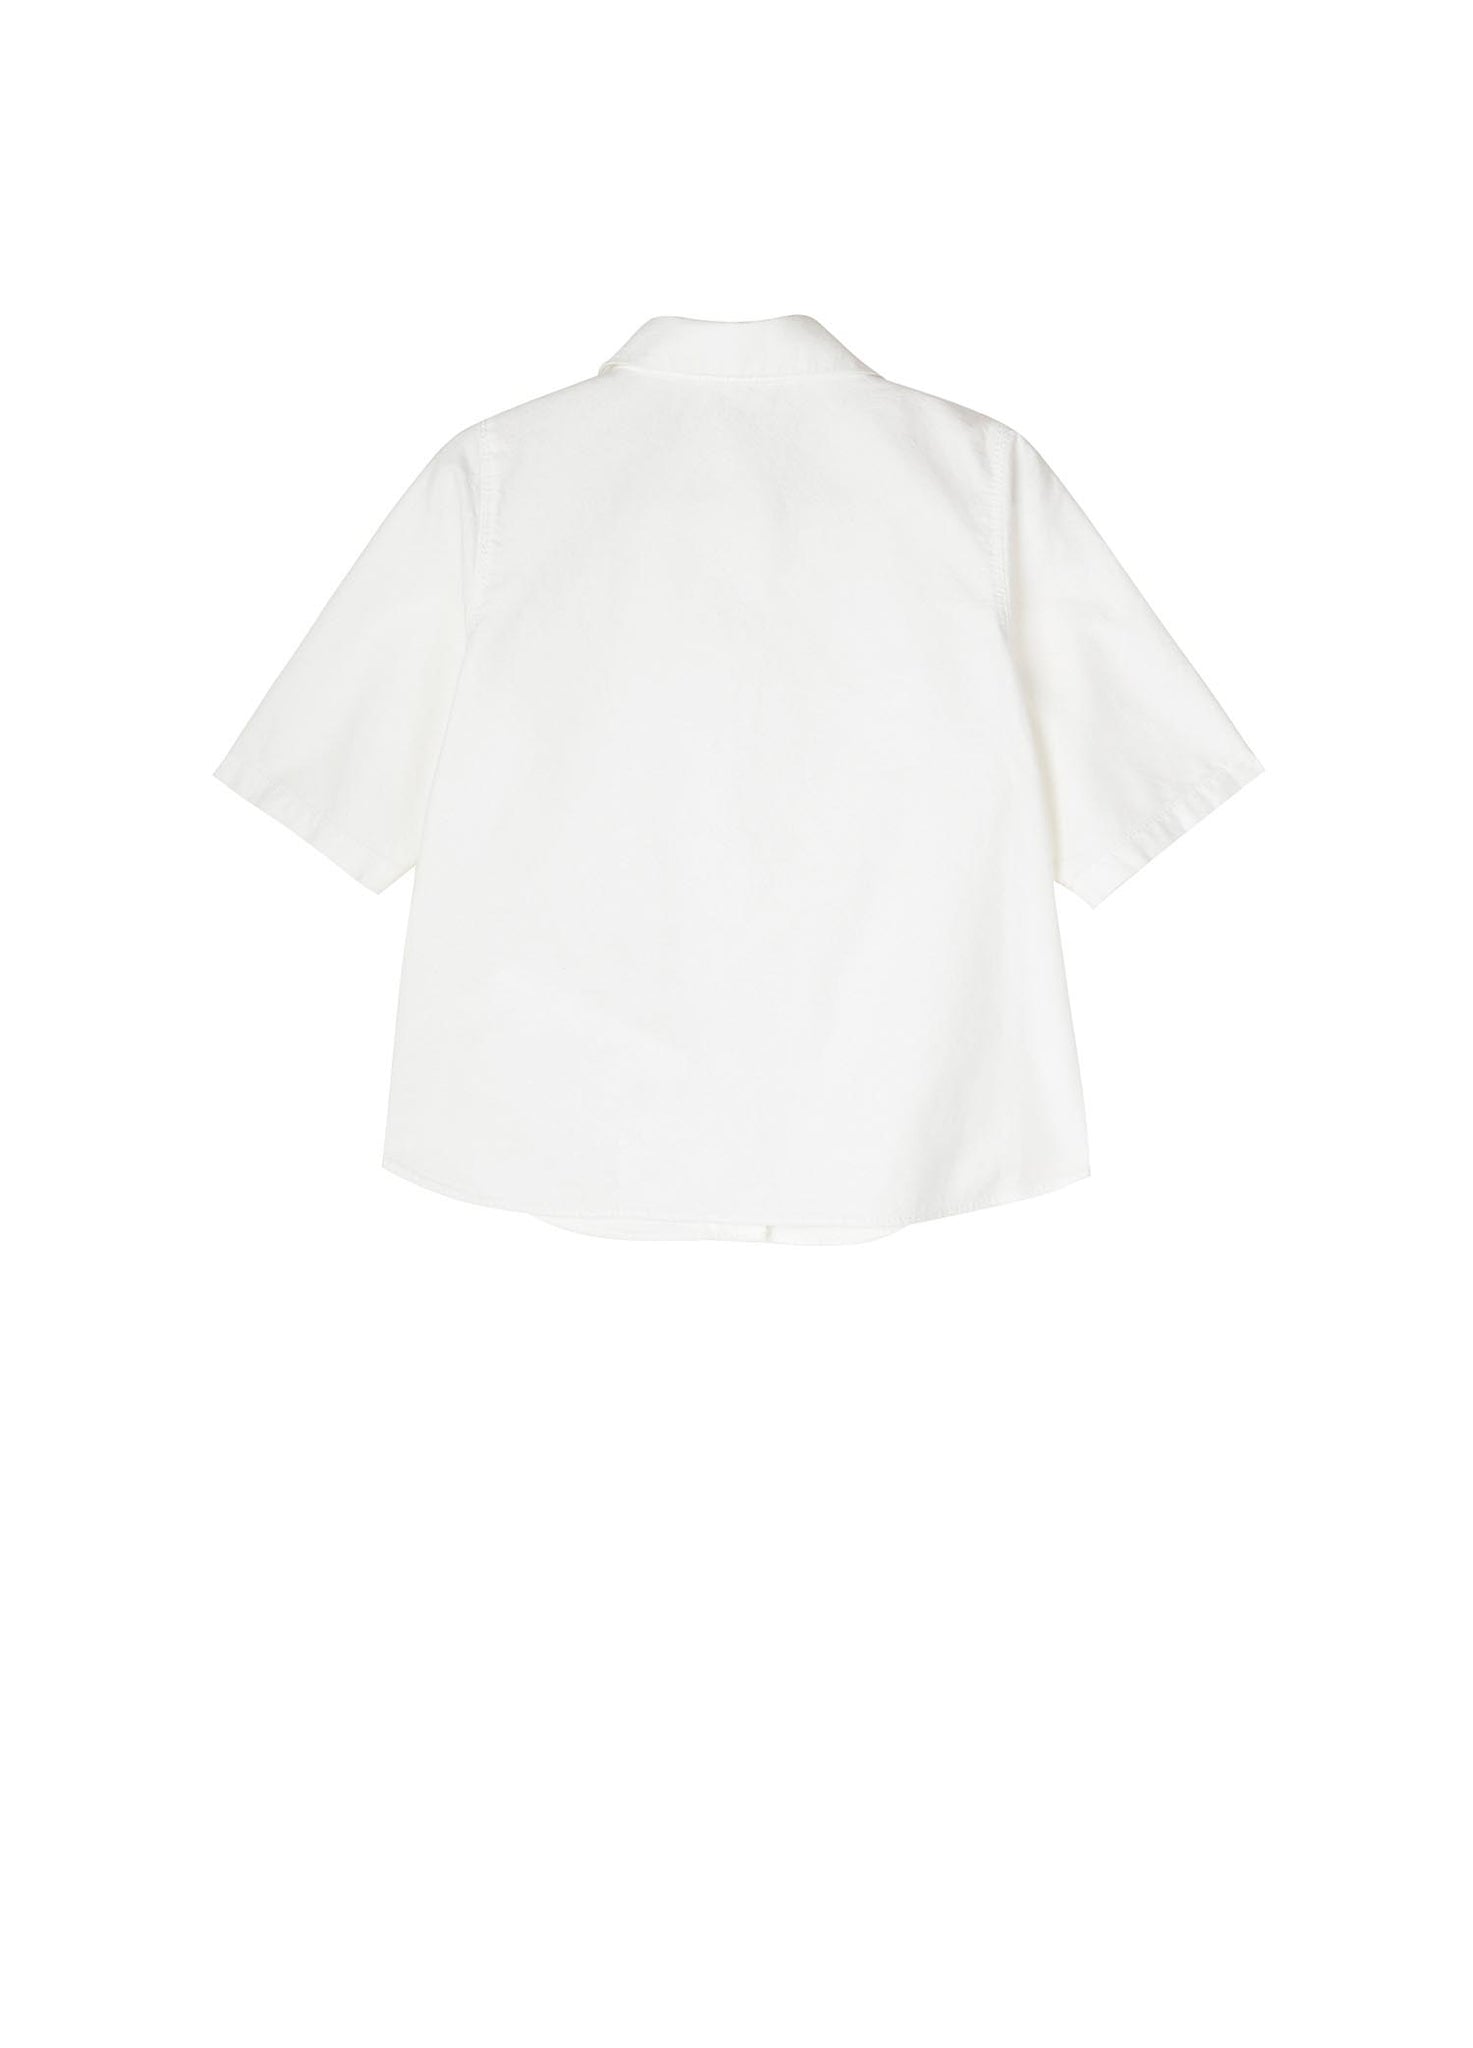 Shirt / jnby by JNBY Fit Wrinkled Short Sleeve Shirt